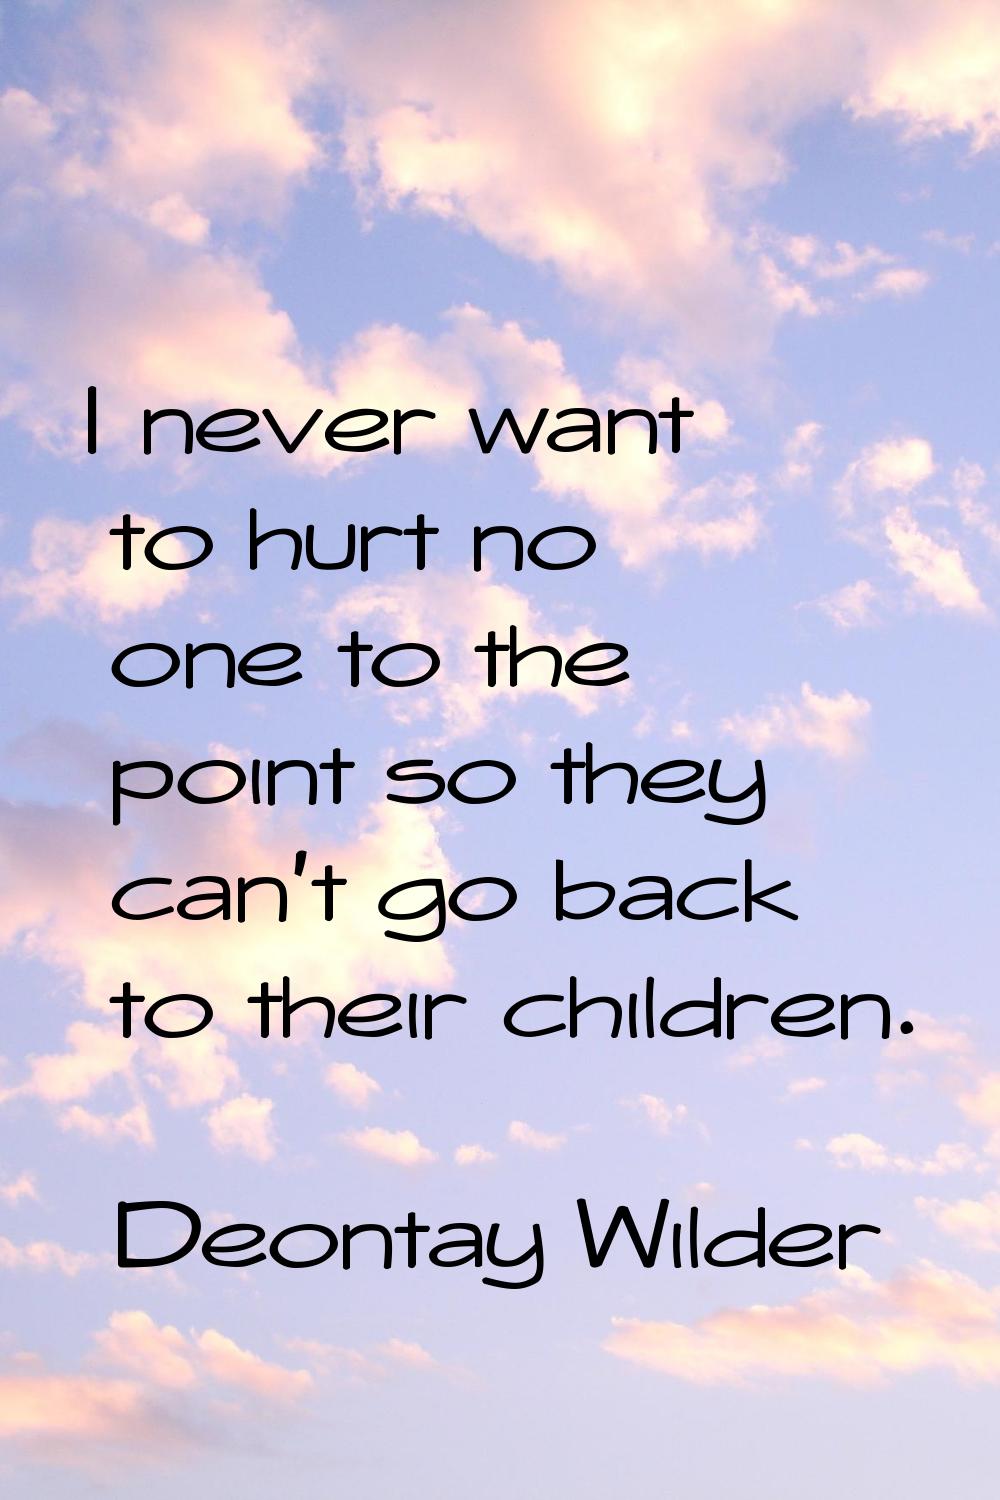 I never want to hurt no one to the point so they can't go back to their children.